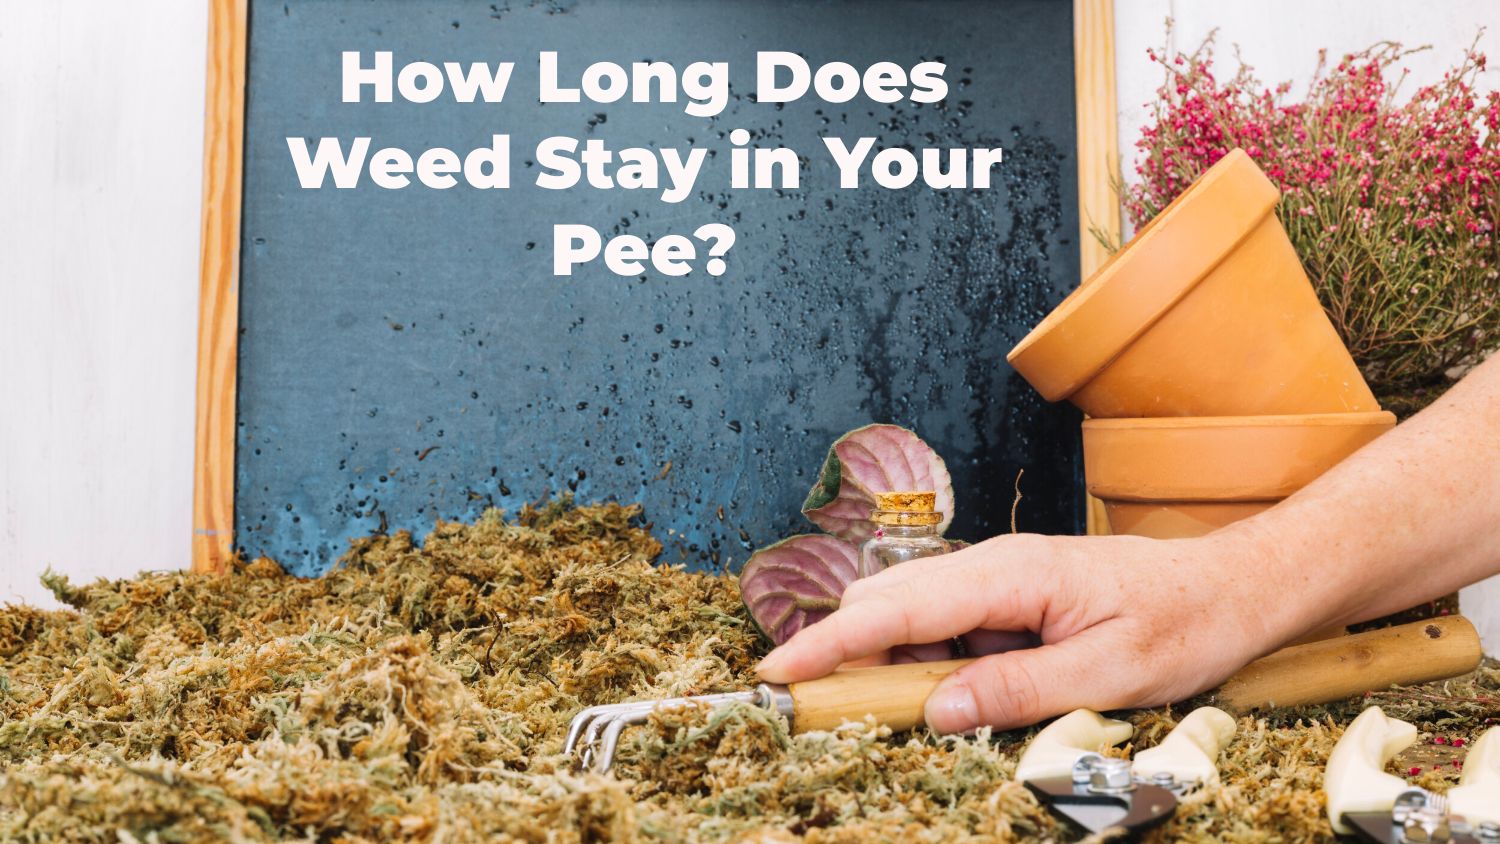 How Long Does Weed Stay in Your Pee?